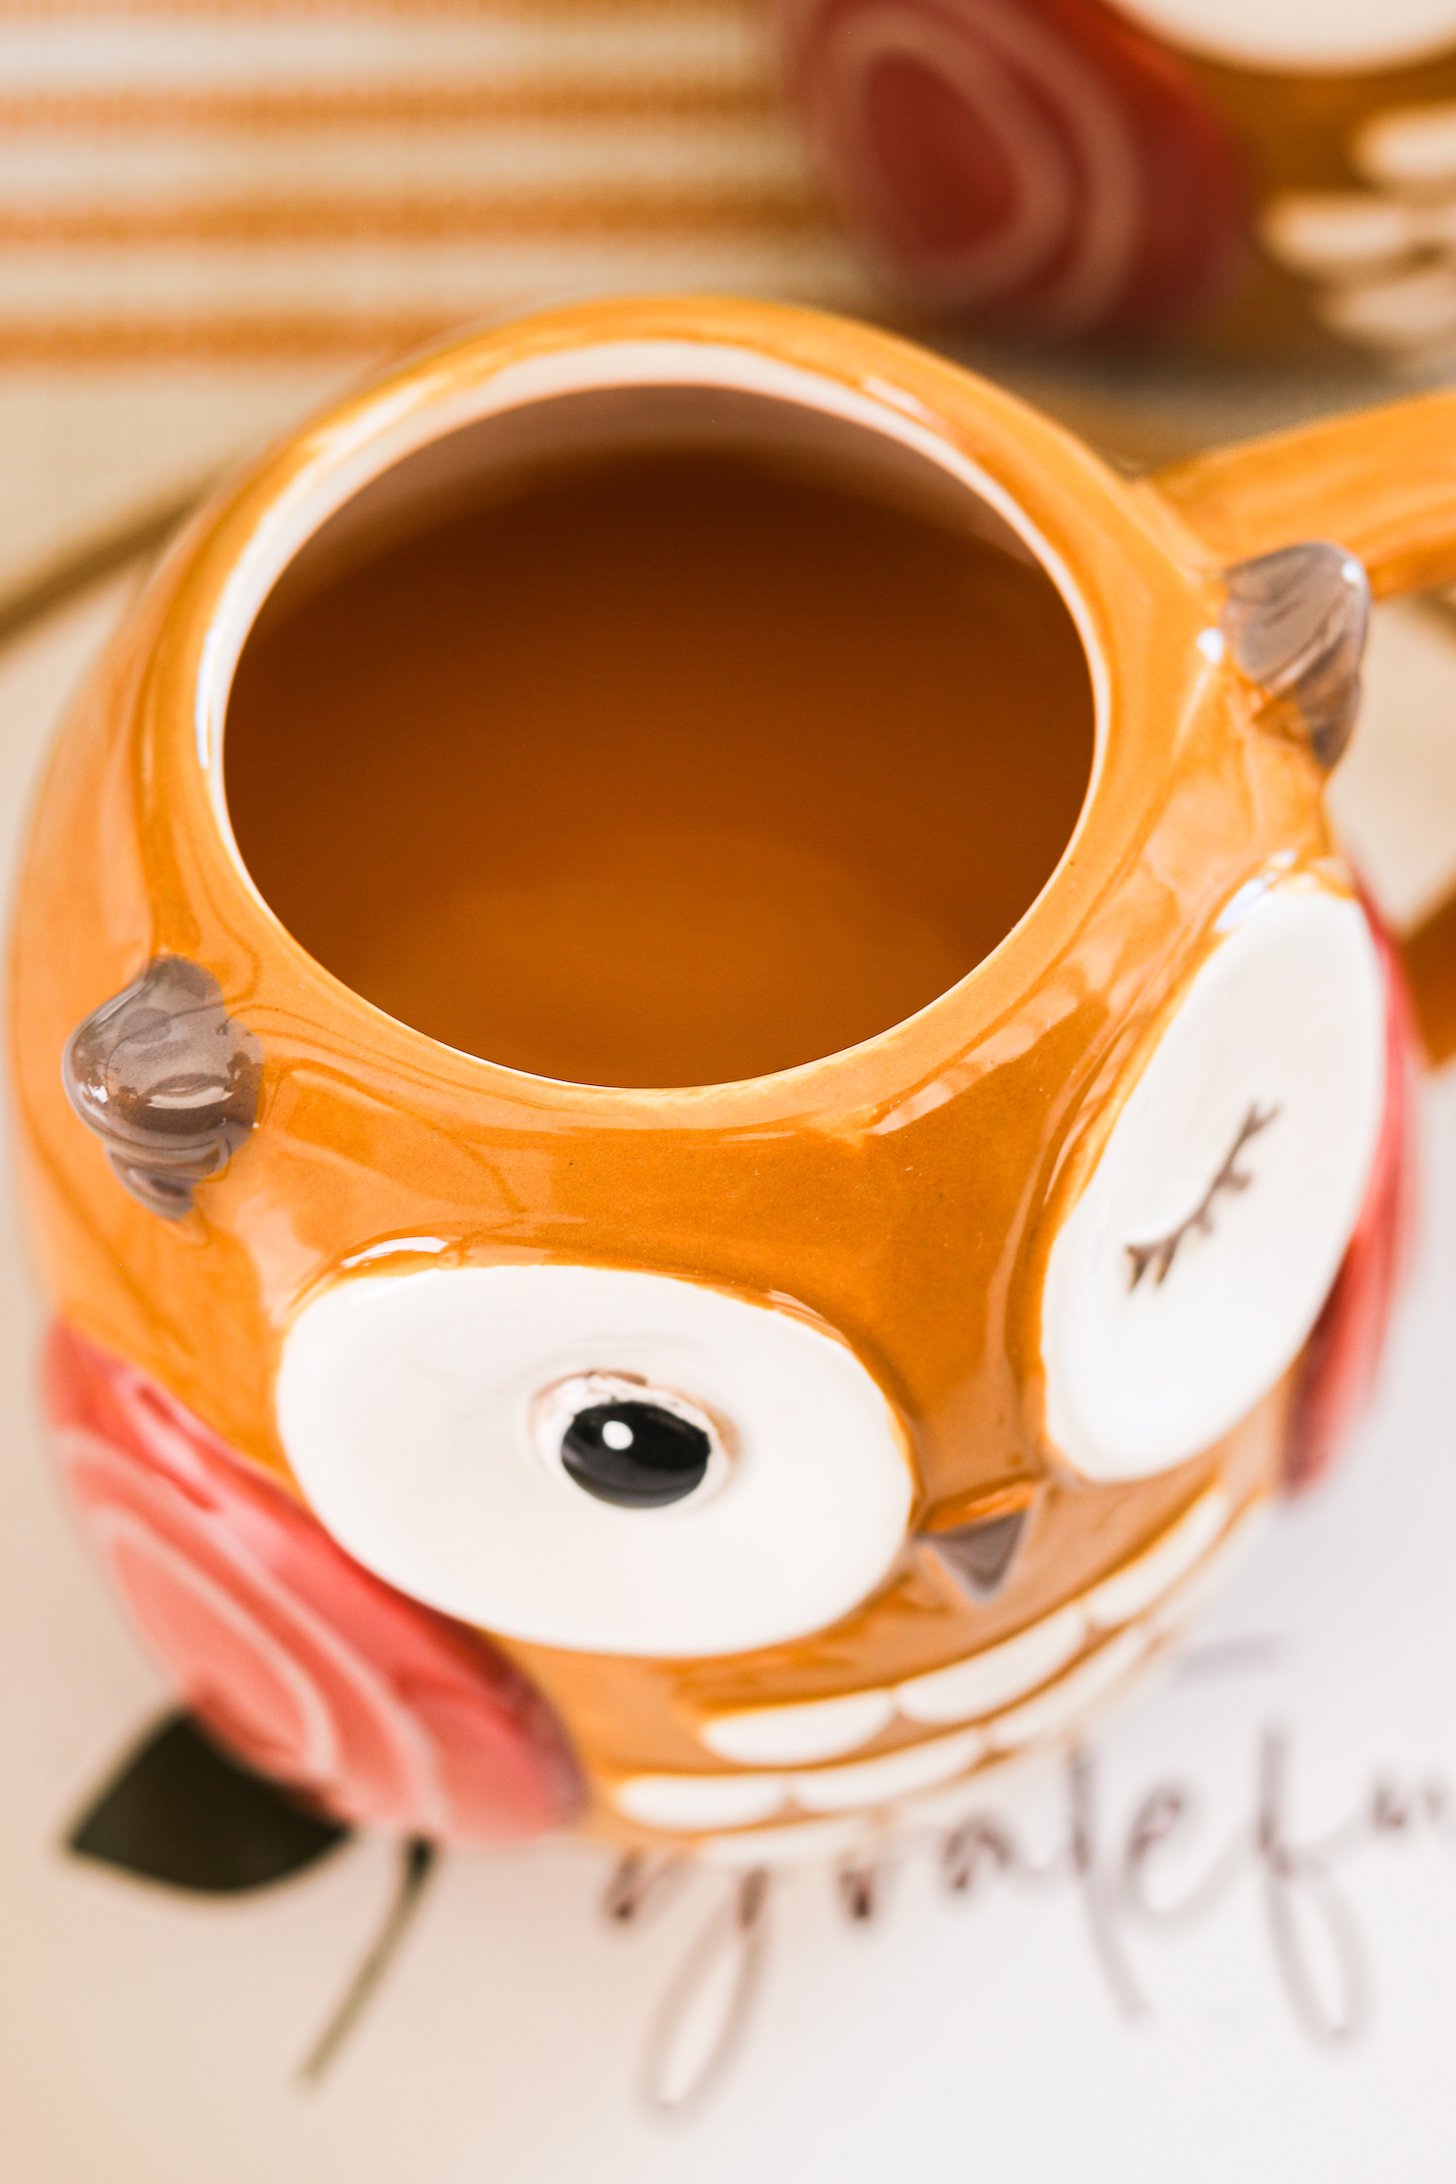 A close up perspective image of an owl mug filled with chai apple cider.